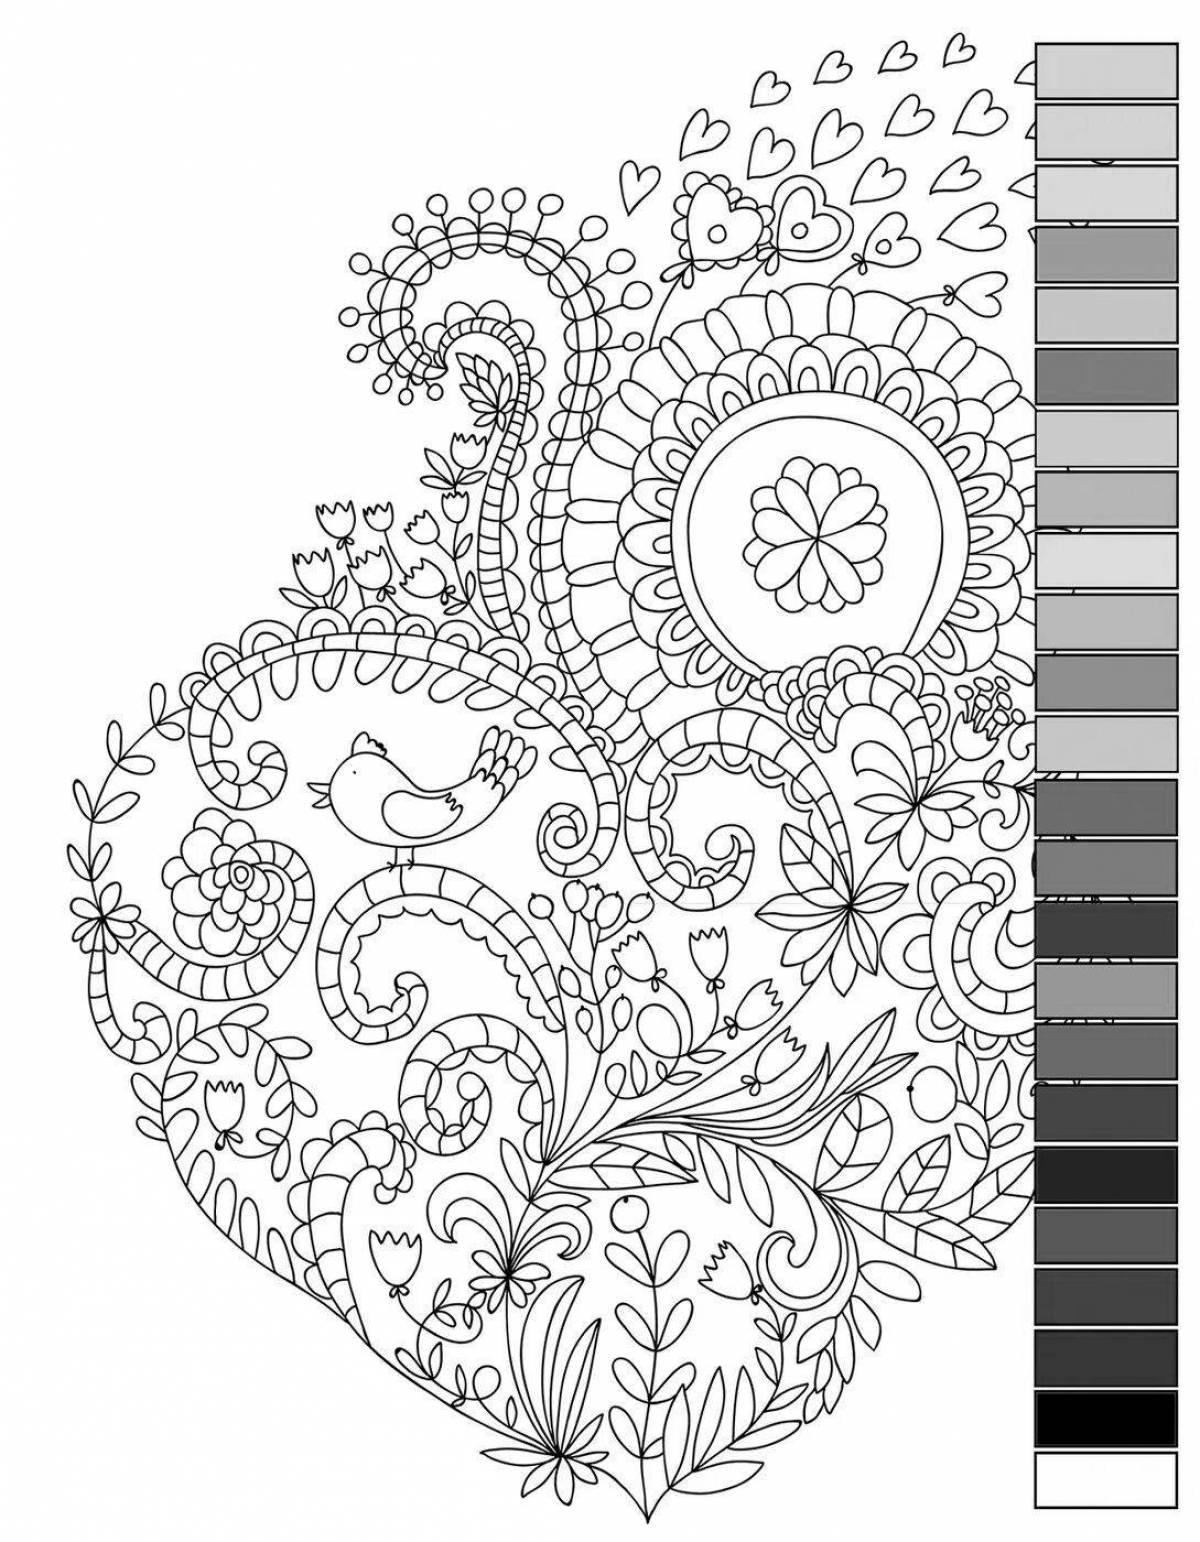 Fantastic heart coloring by numbers